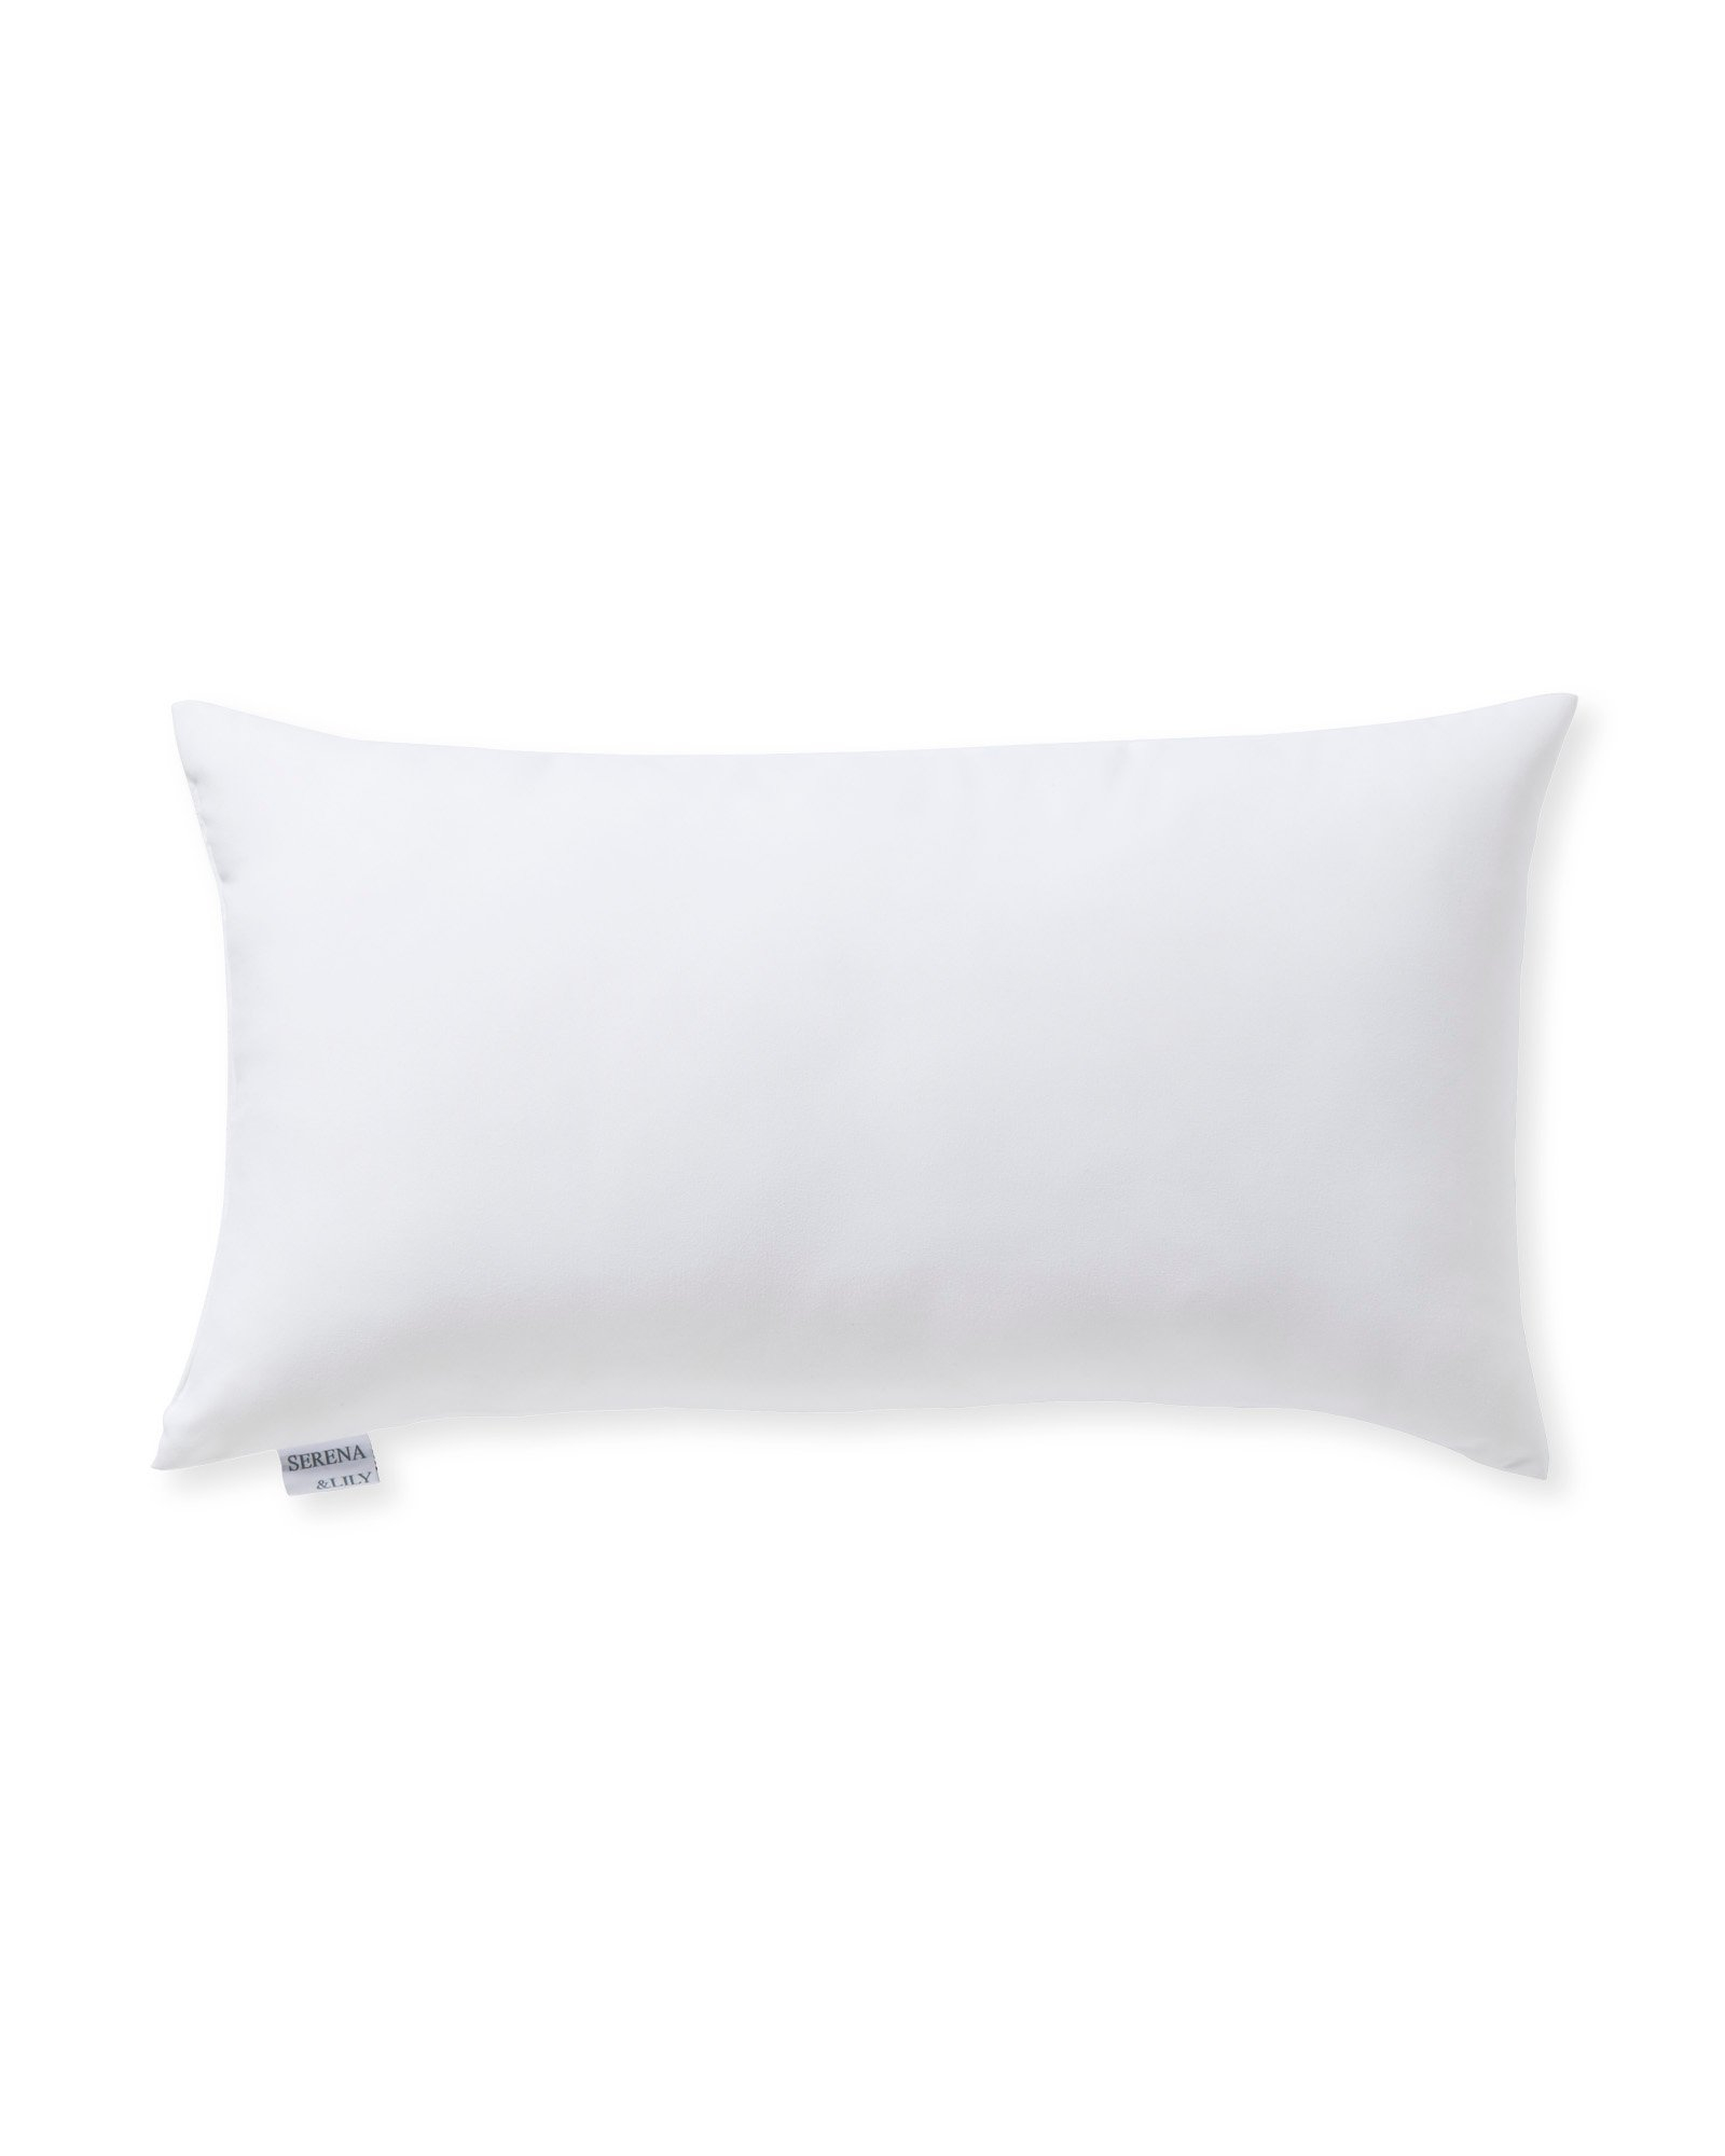 Outdoor Pillow Insert - 12" x 21" - Serena and Lily